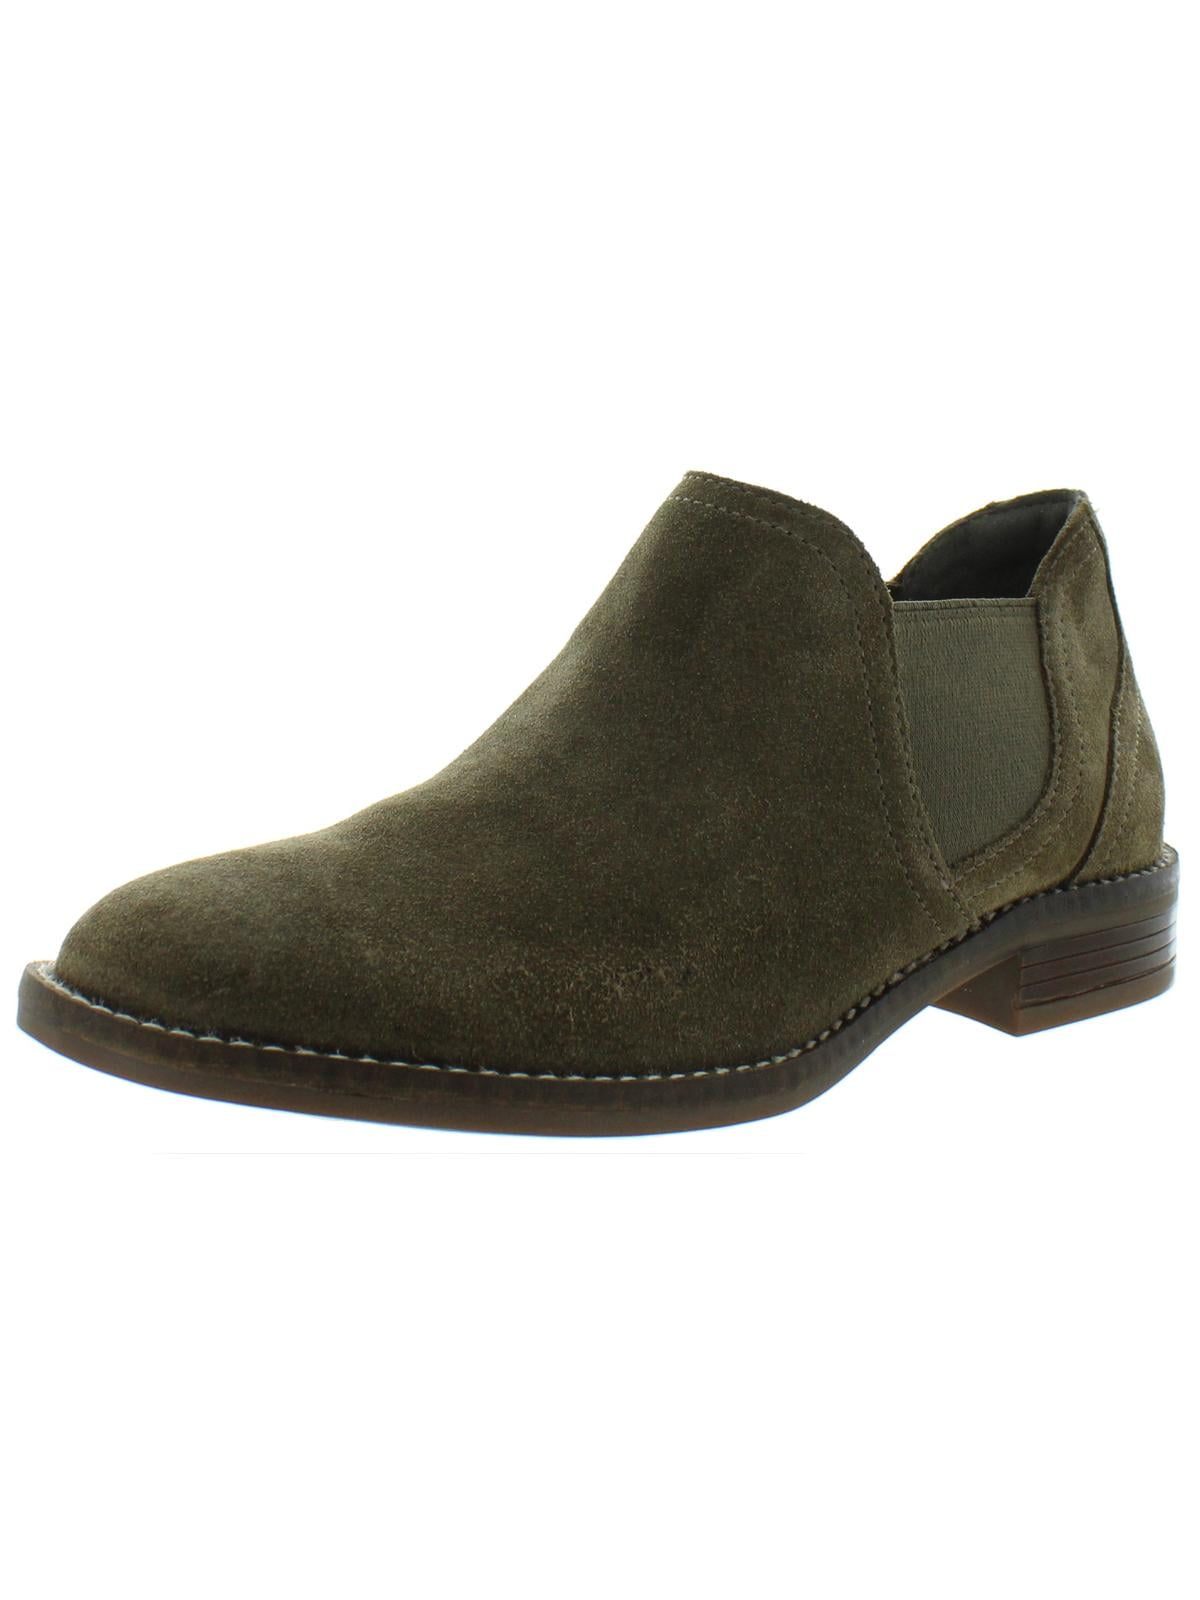 clarks suede slip on loafers